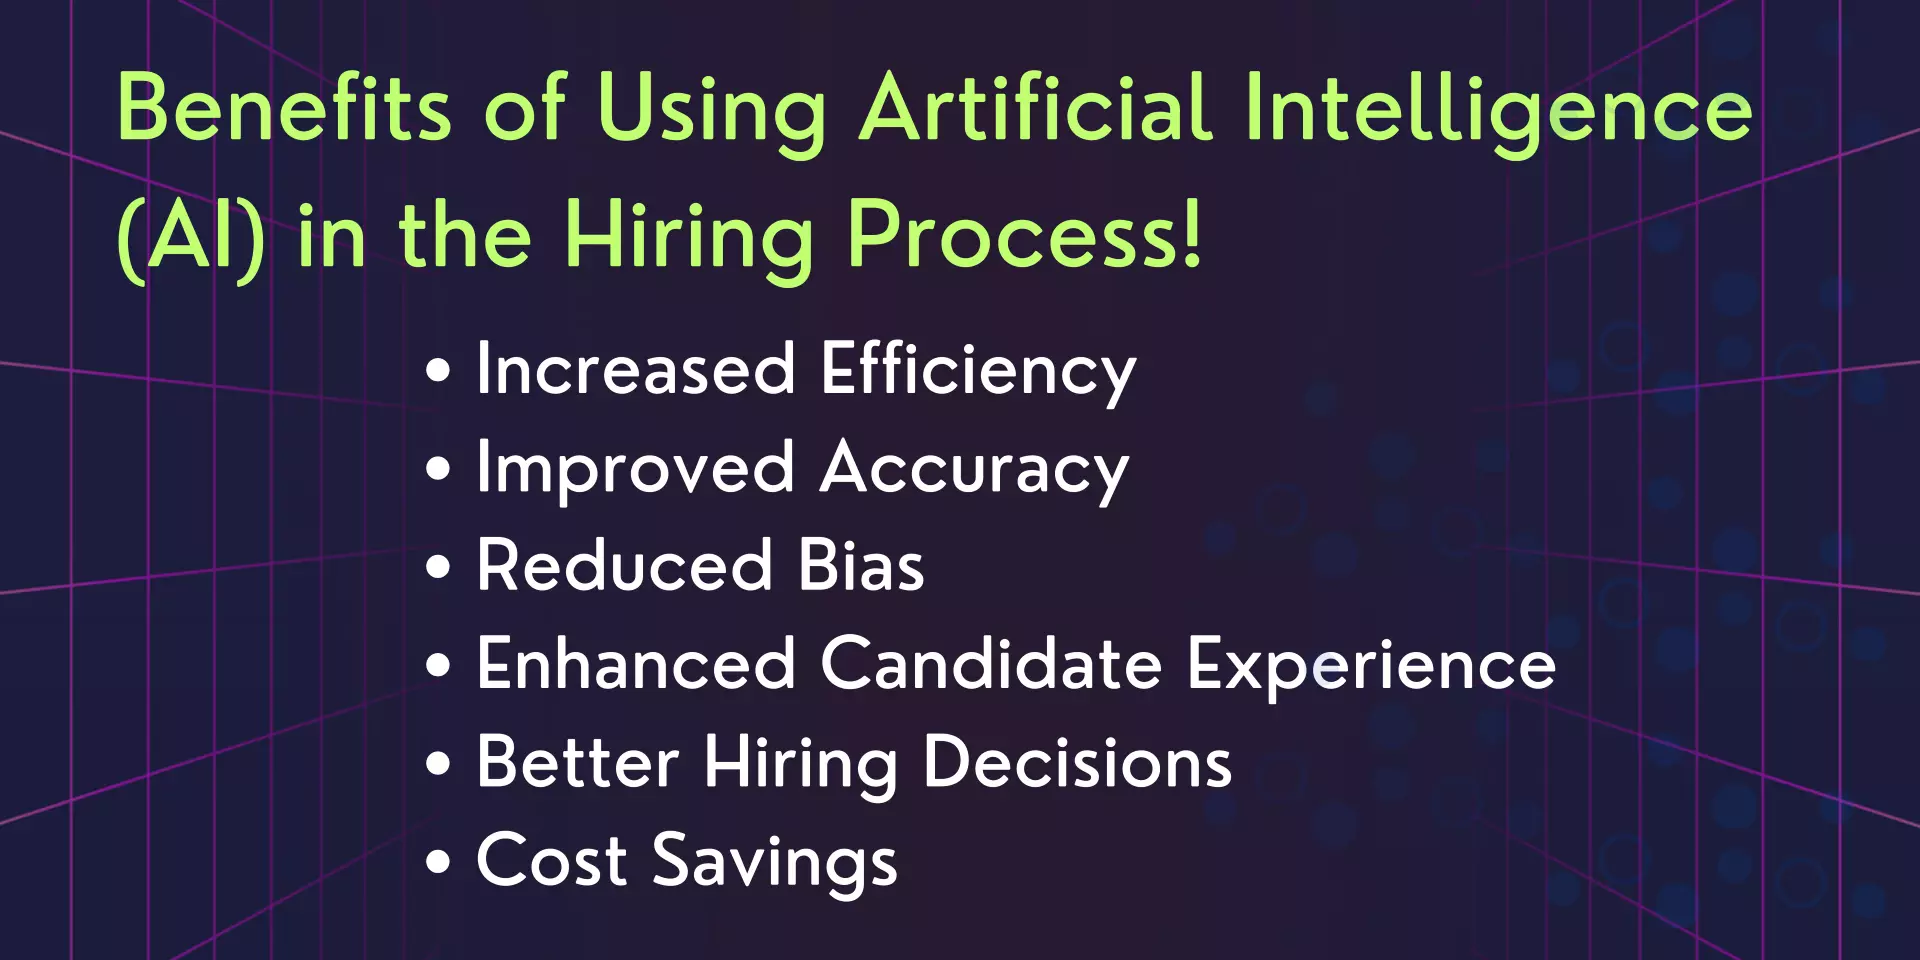 Benefits of Using AI in the Hiring Process